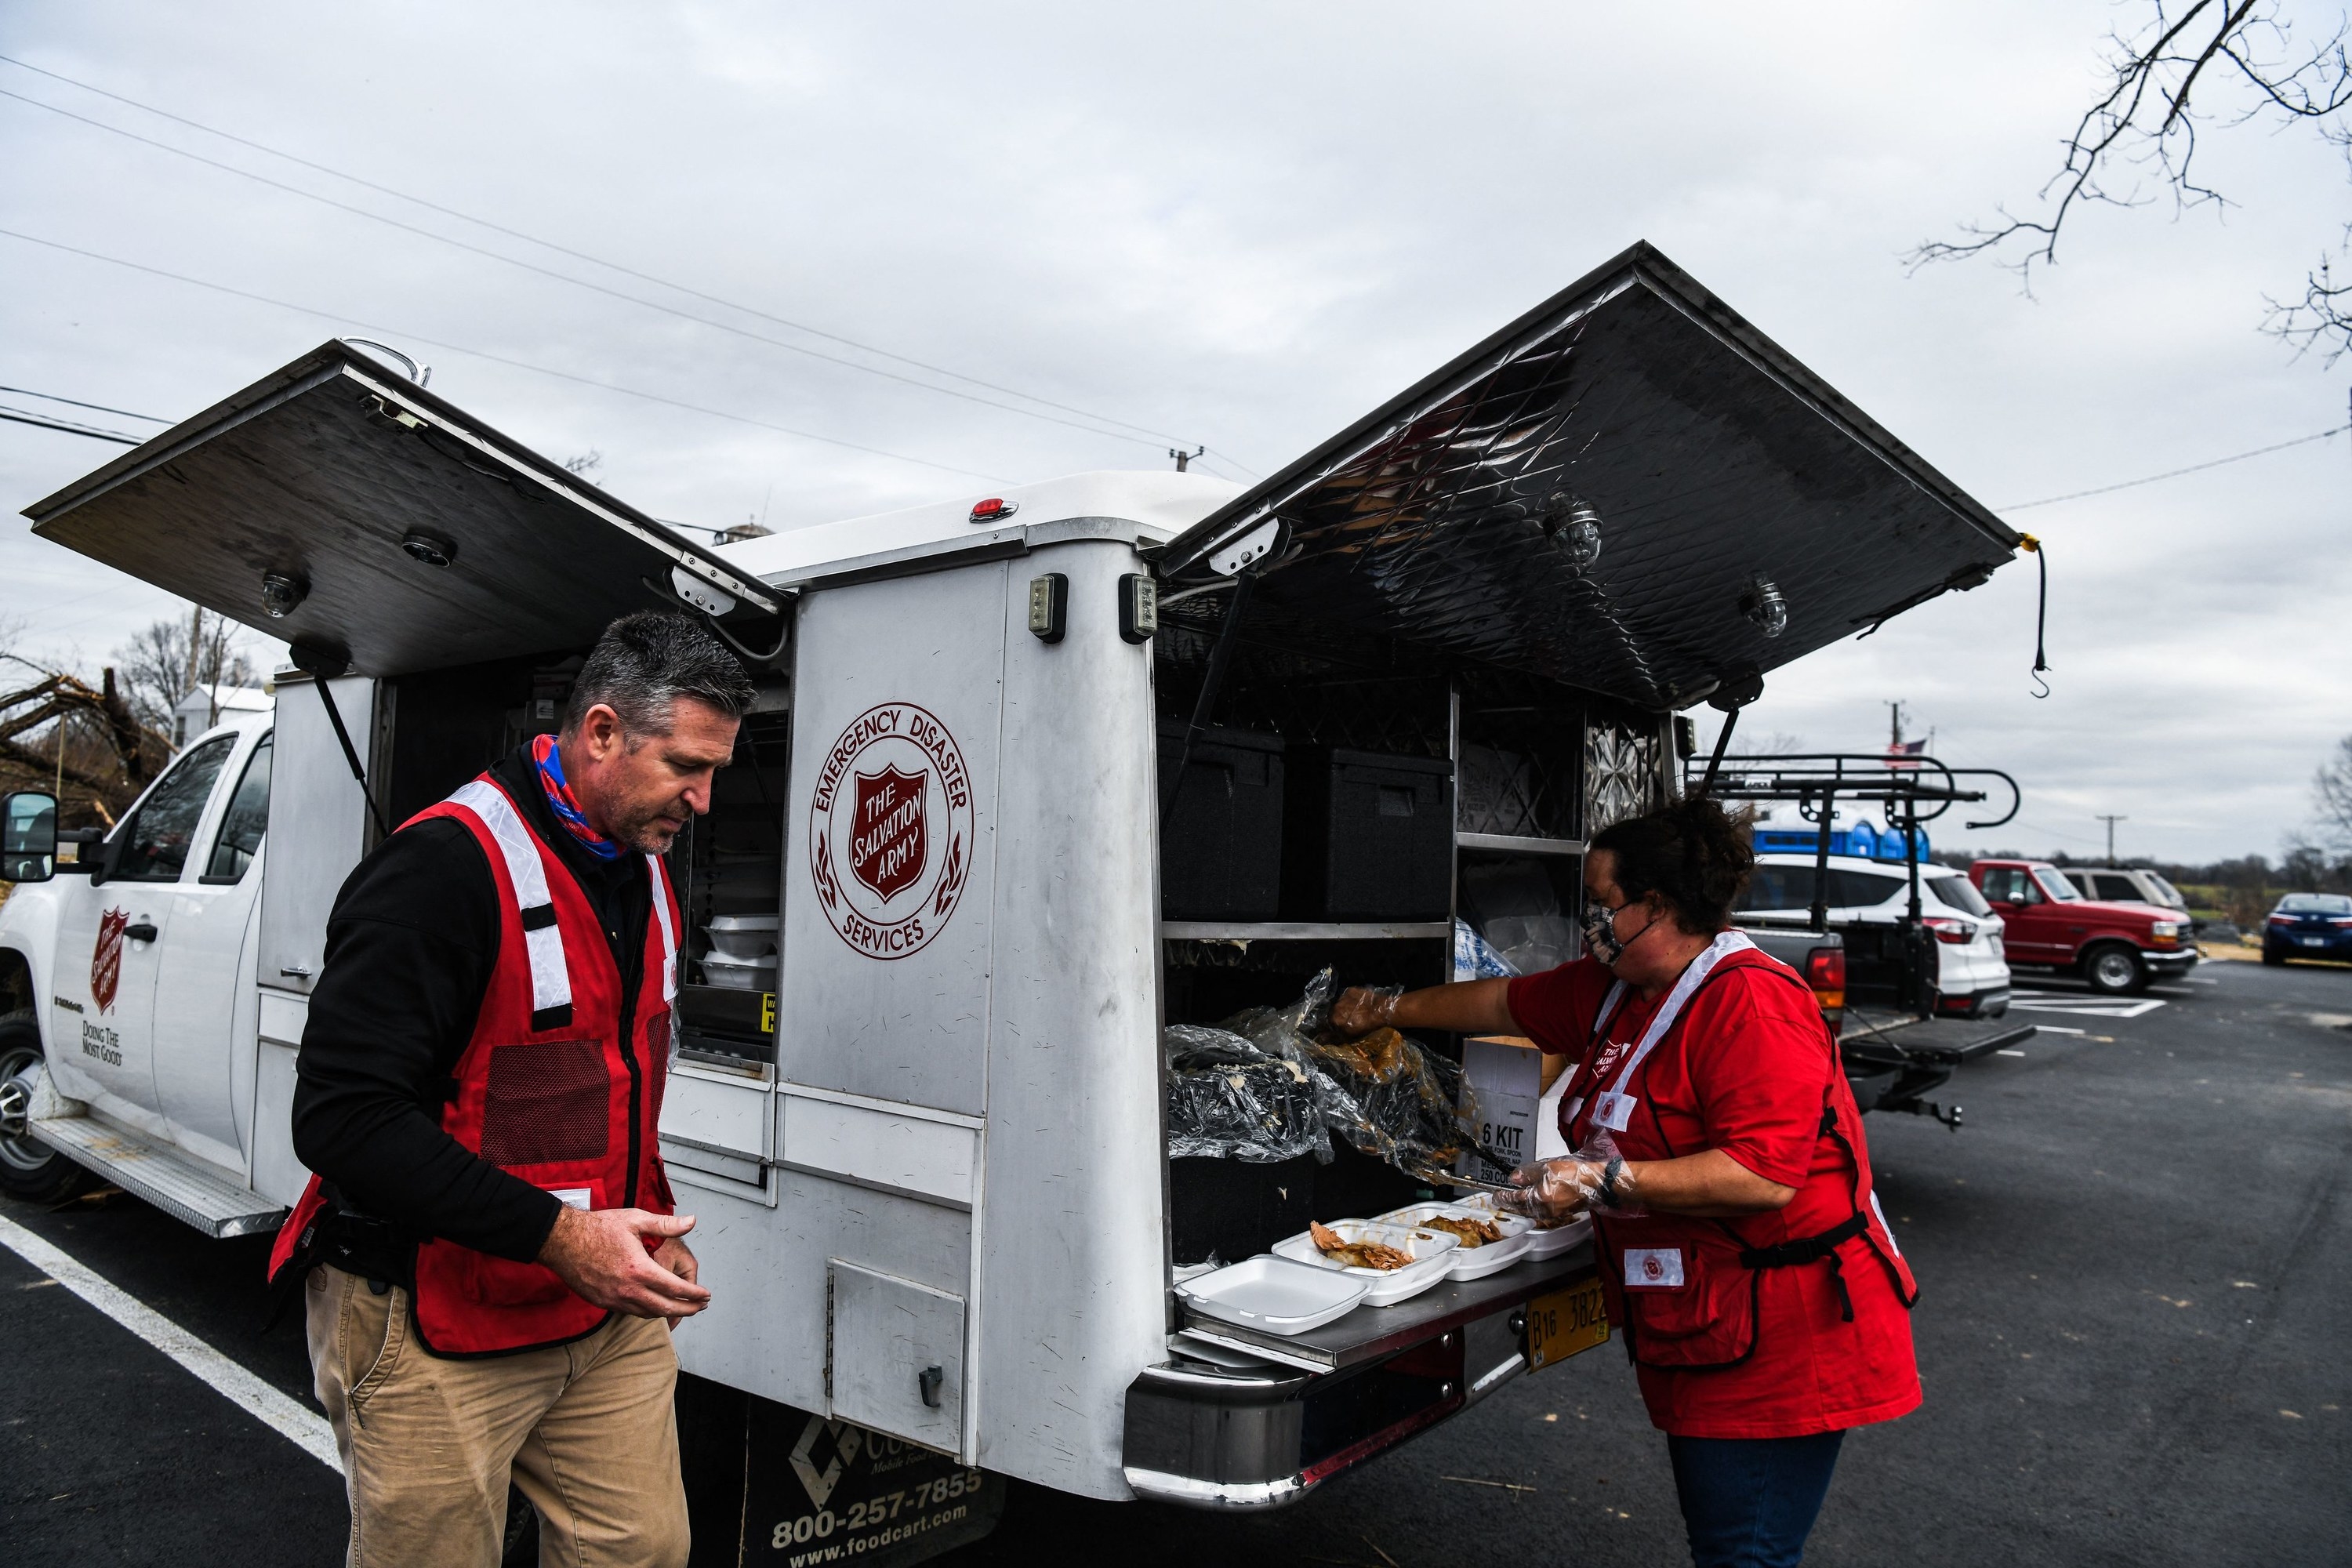 A man and woman in safety vests outside a salvation army emergency disaster truck distributing food